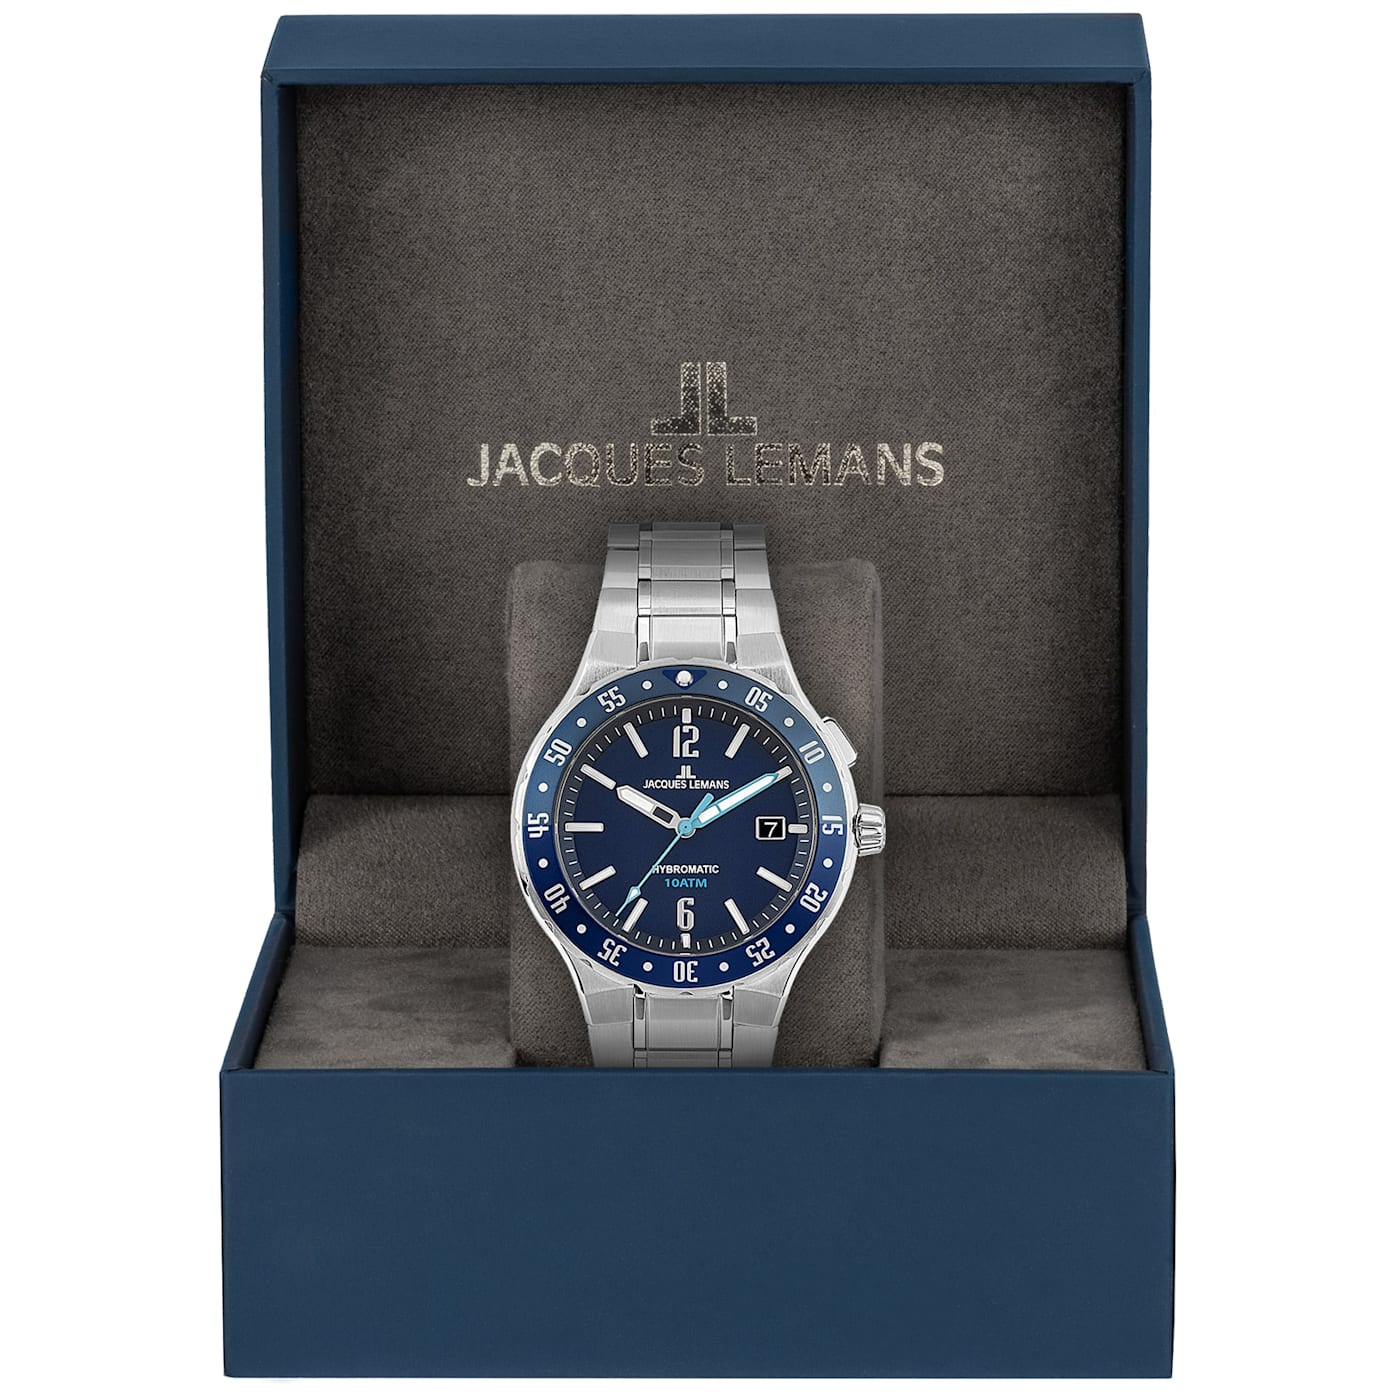 JACQUES LEMANS Hybromatic Men's Watch with Solid Stainless Steel Strap 1- 2109 - 18M20A